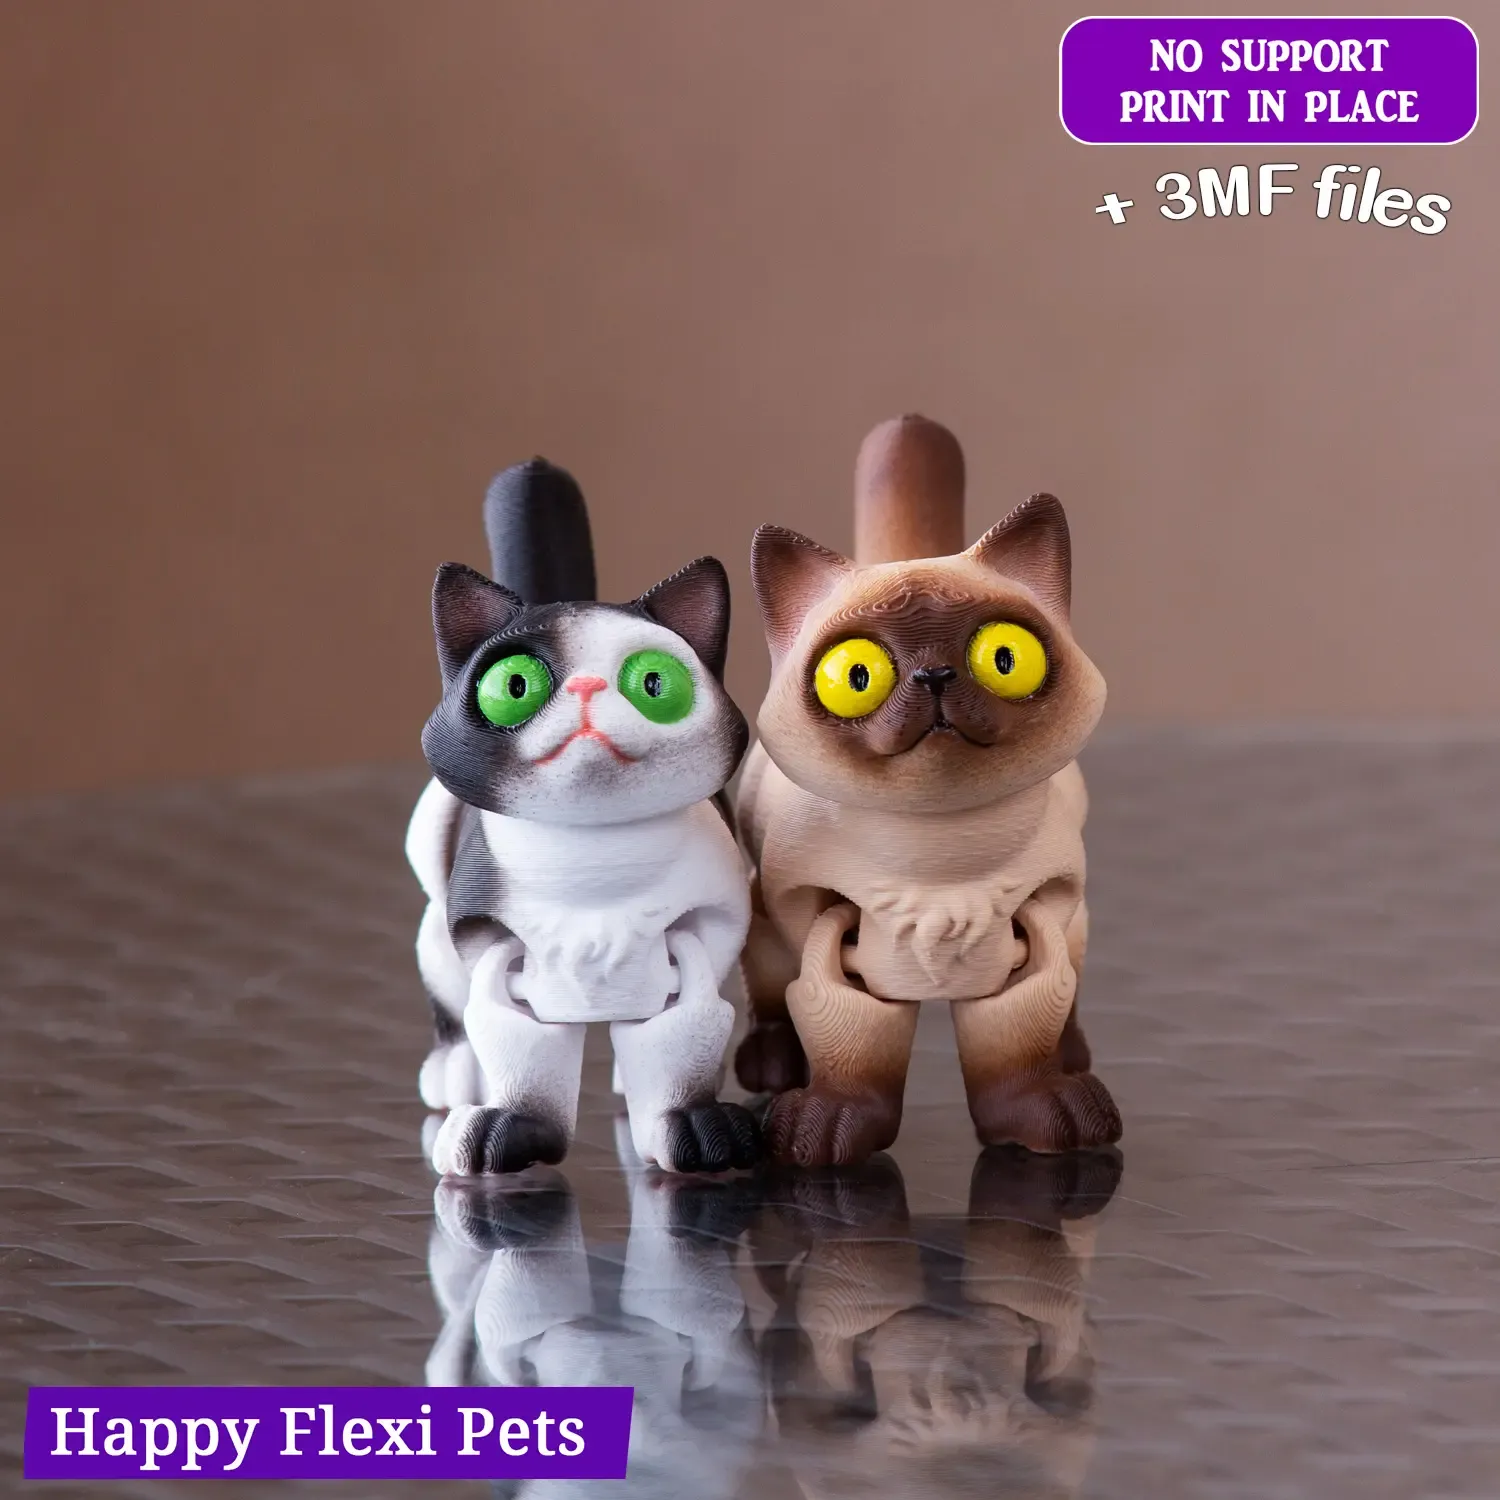 Baron the articulated fat cat toy - Happy Flexi pets